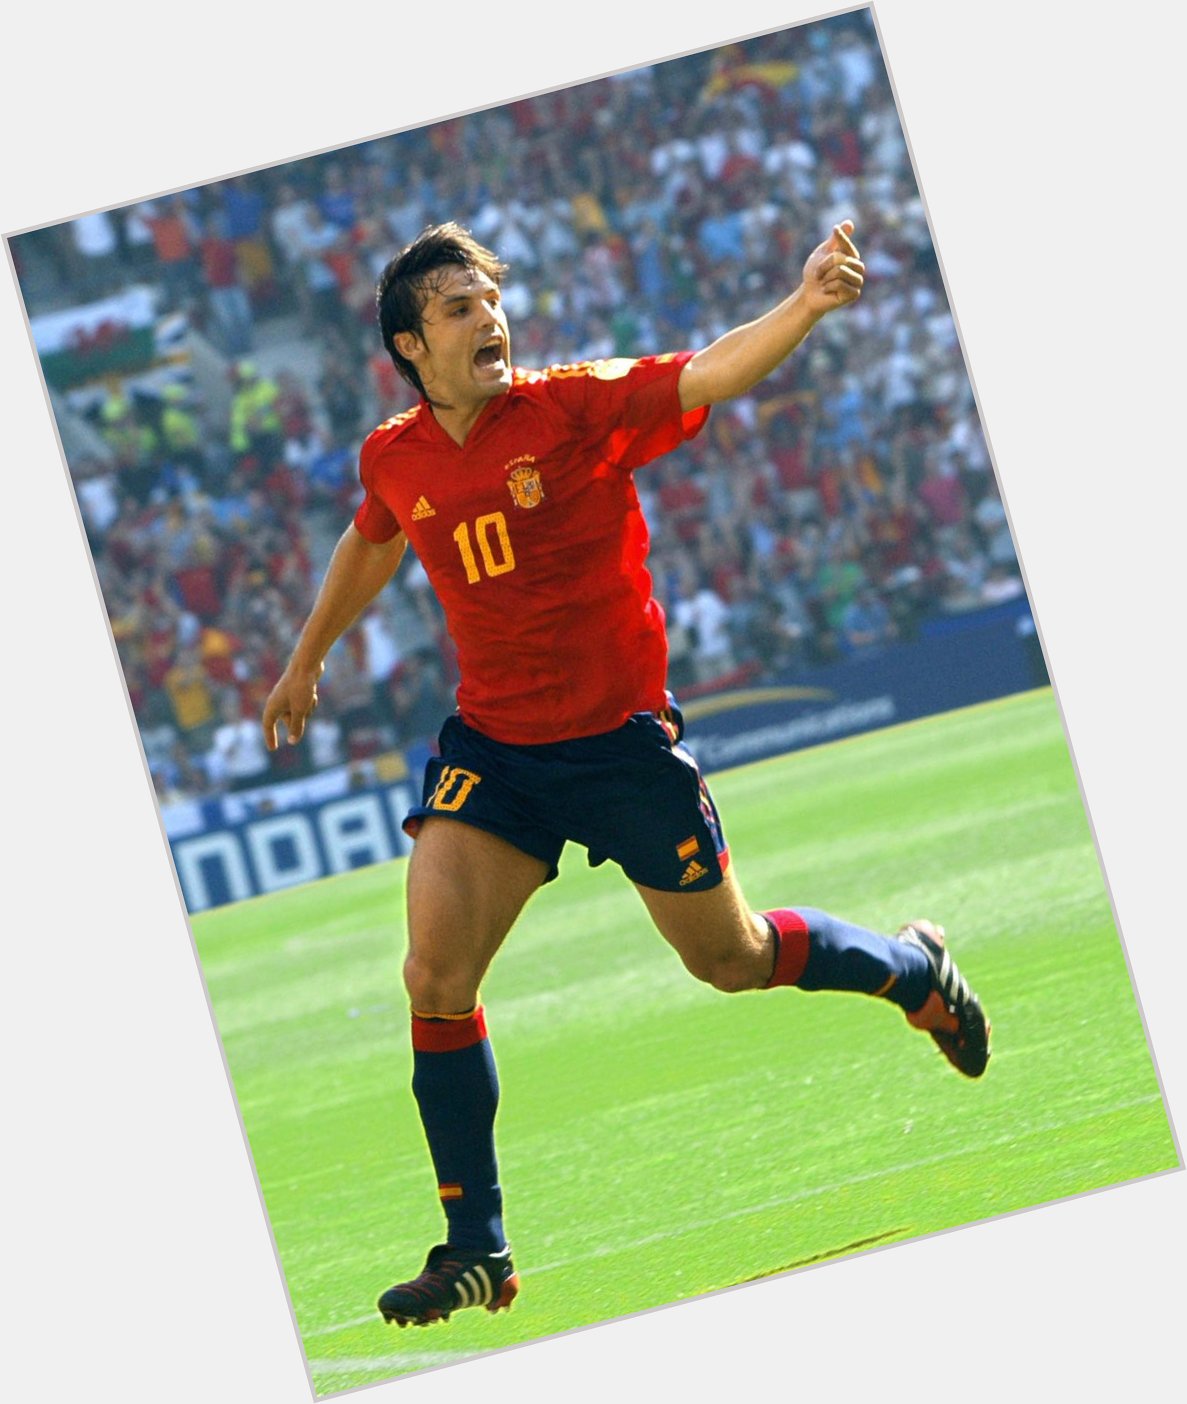 He scored 27 goals in 47 appearances for Spain...

Wish Fernando Morientes a happy 41st birthday!   